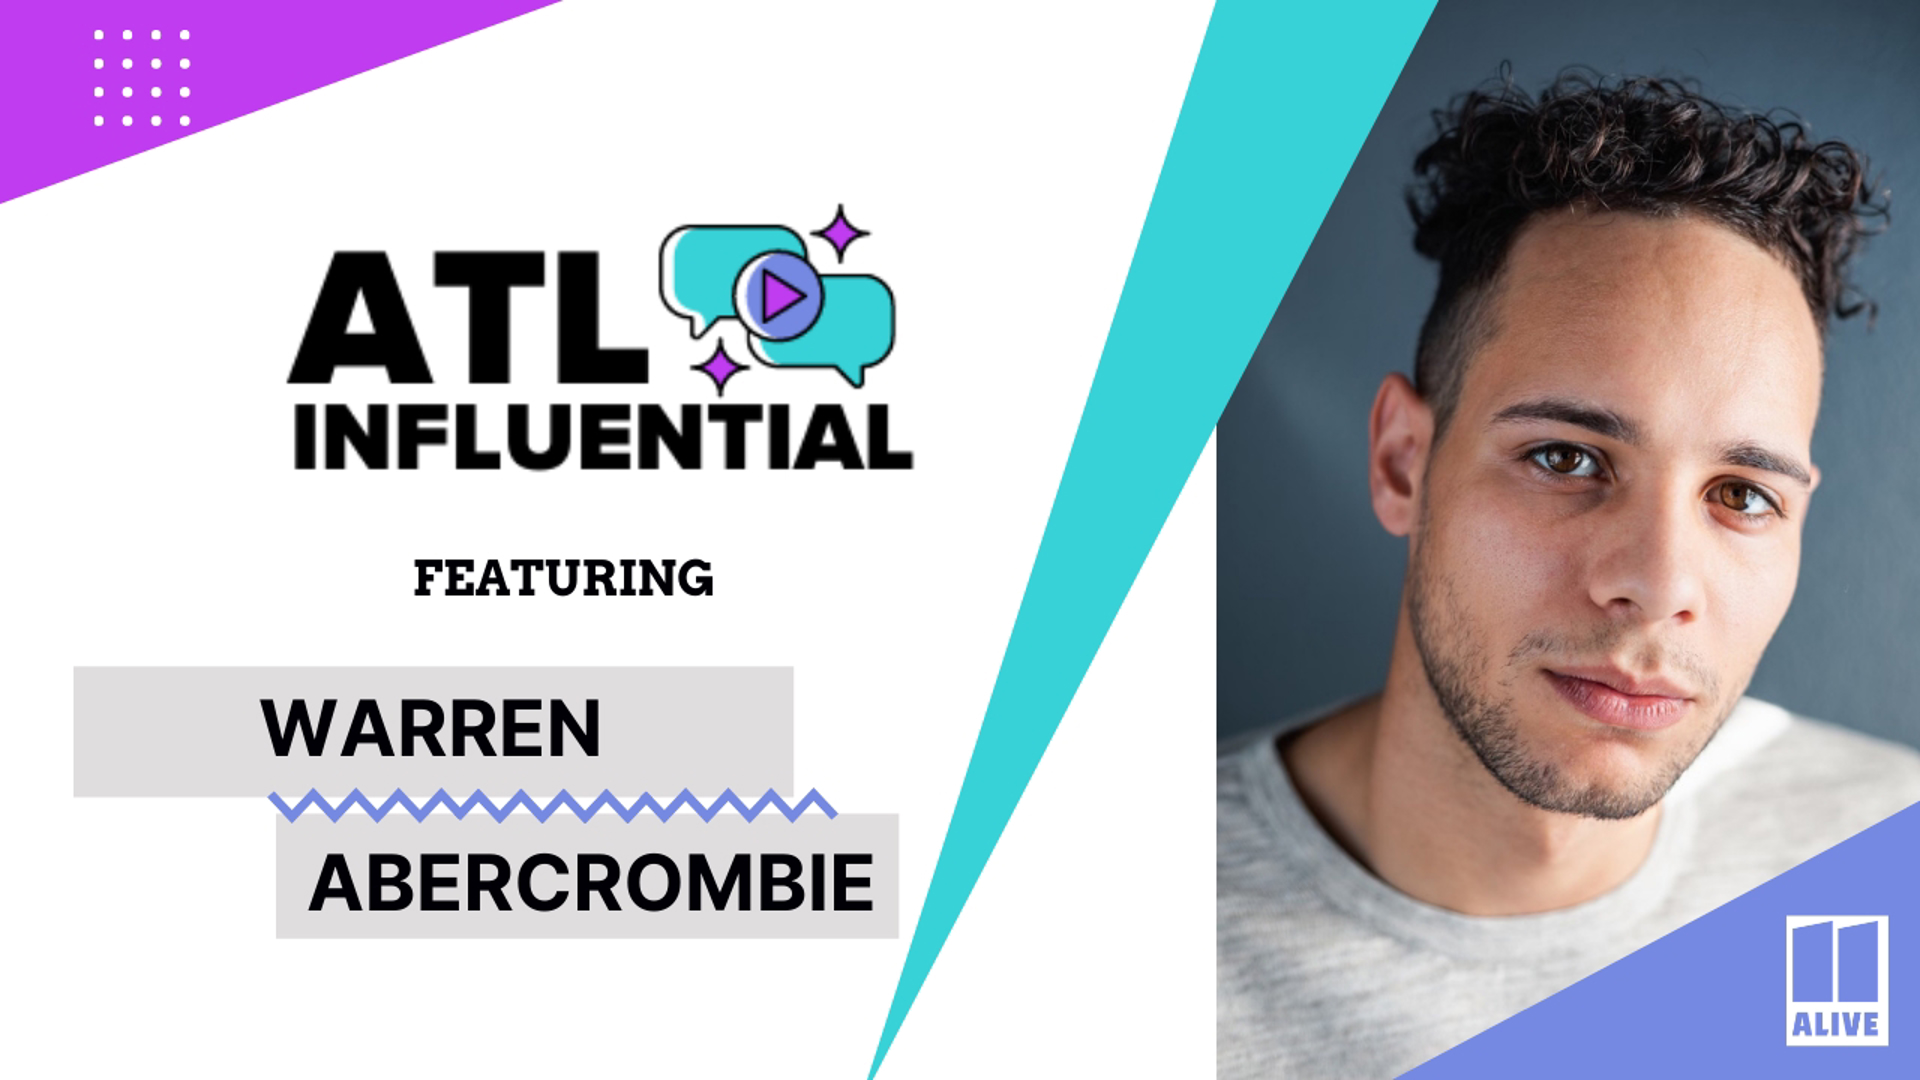 ATL Influential host Tianne Johnson chats with actor, comedian, writer and director Warren Abercrombie about his path to becoming a full-time content creator.